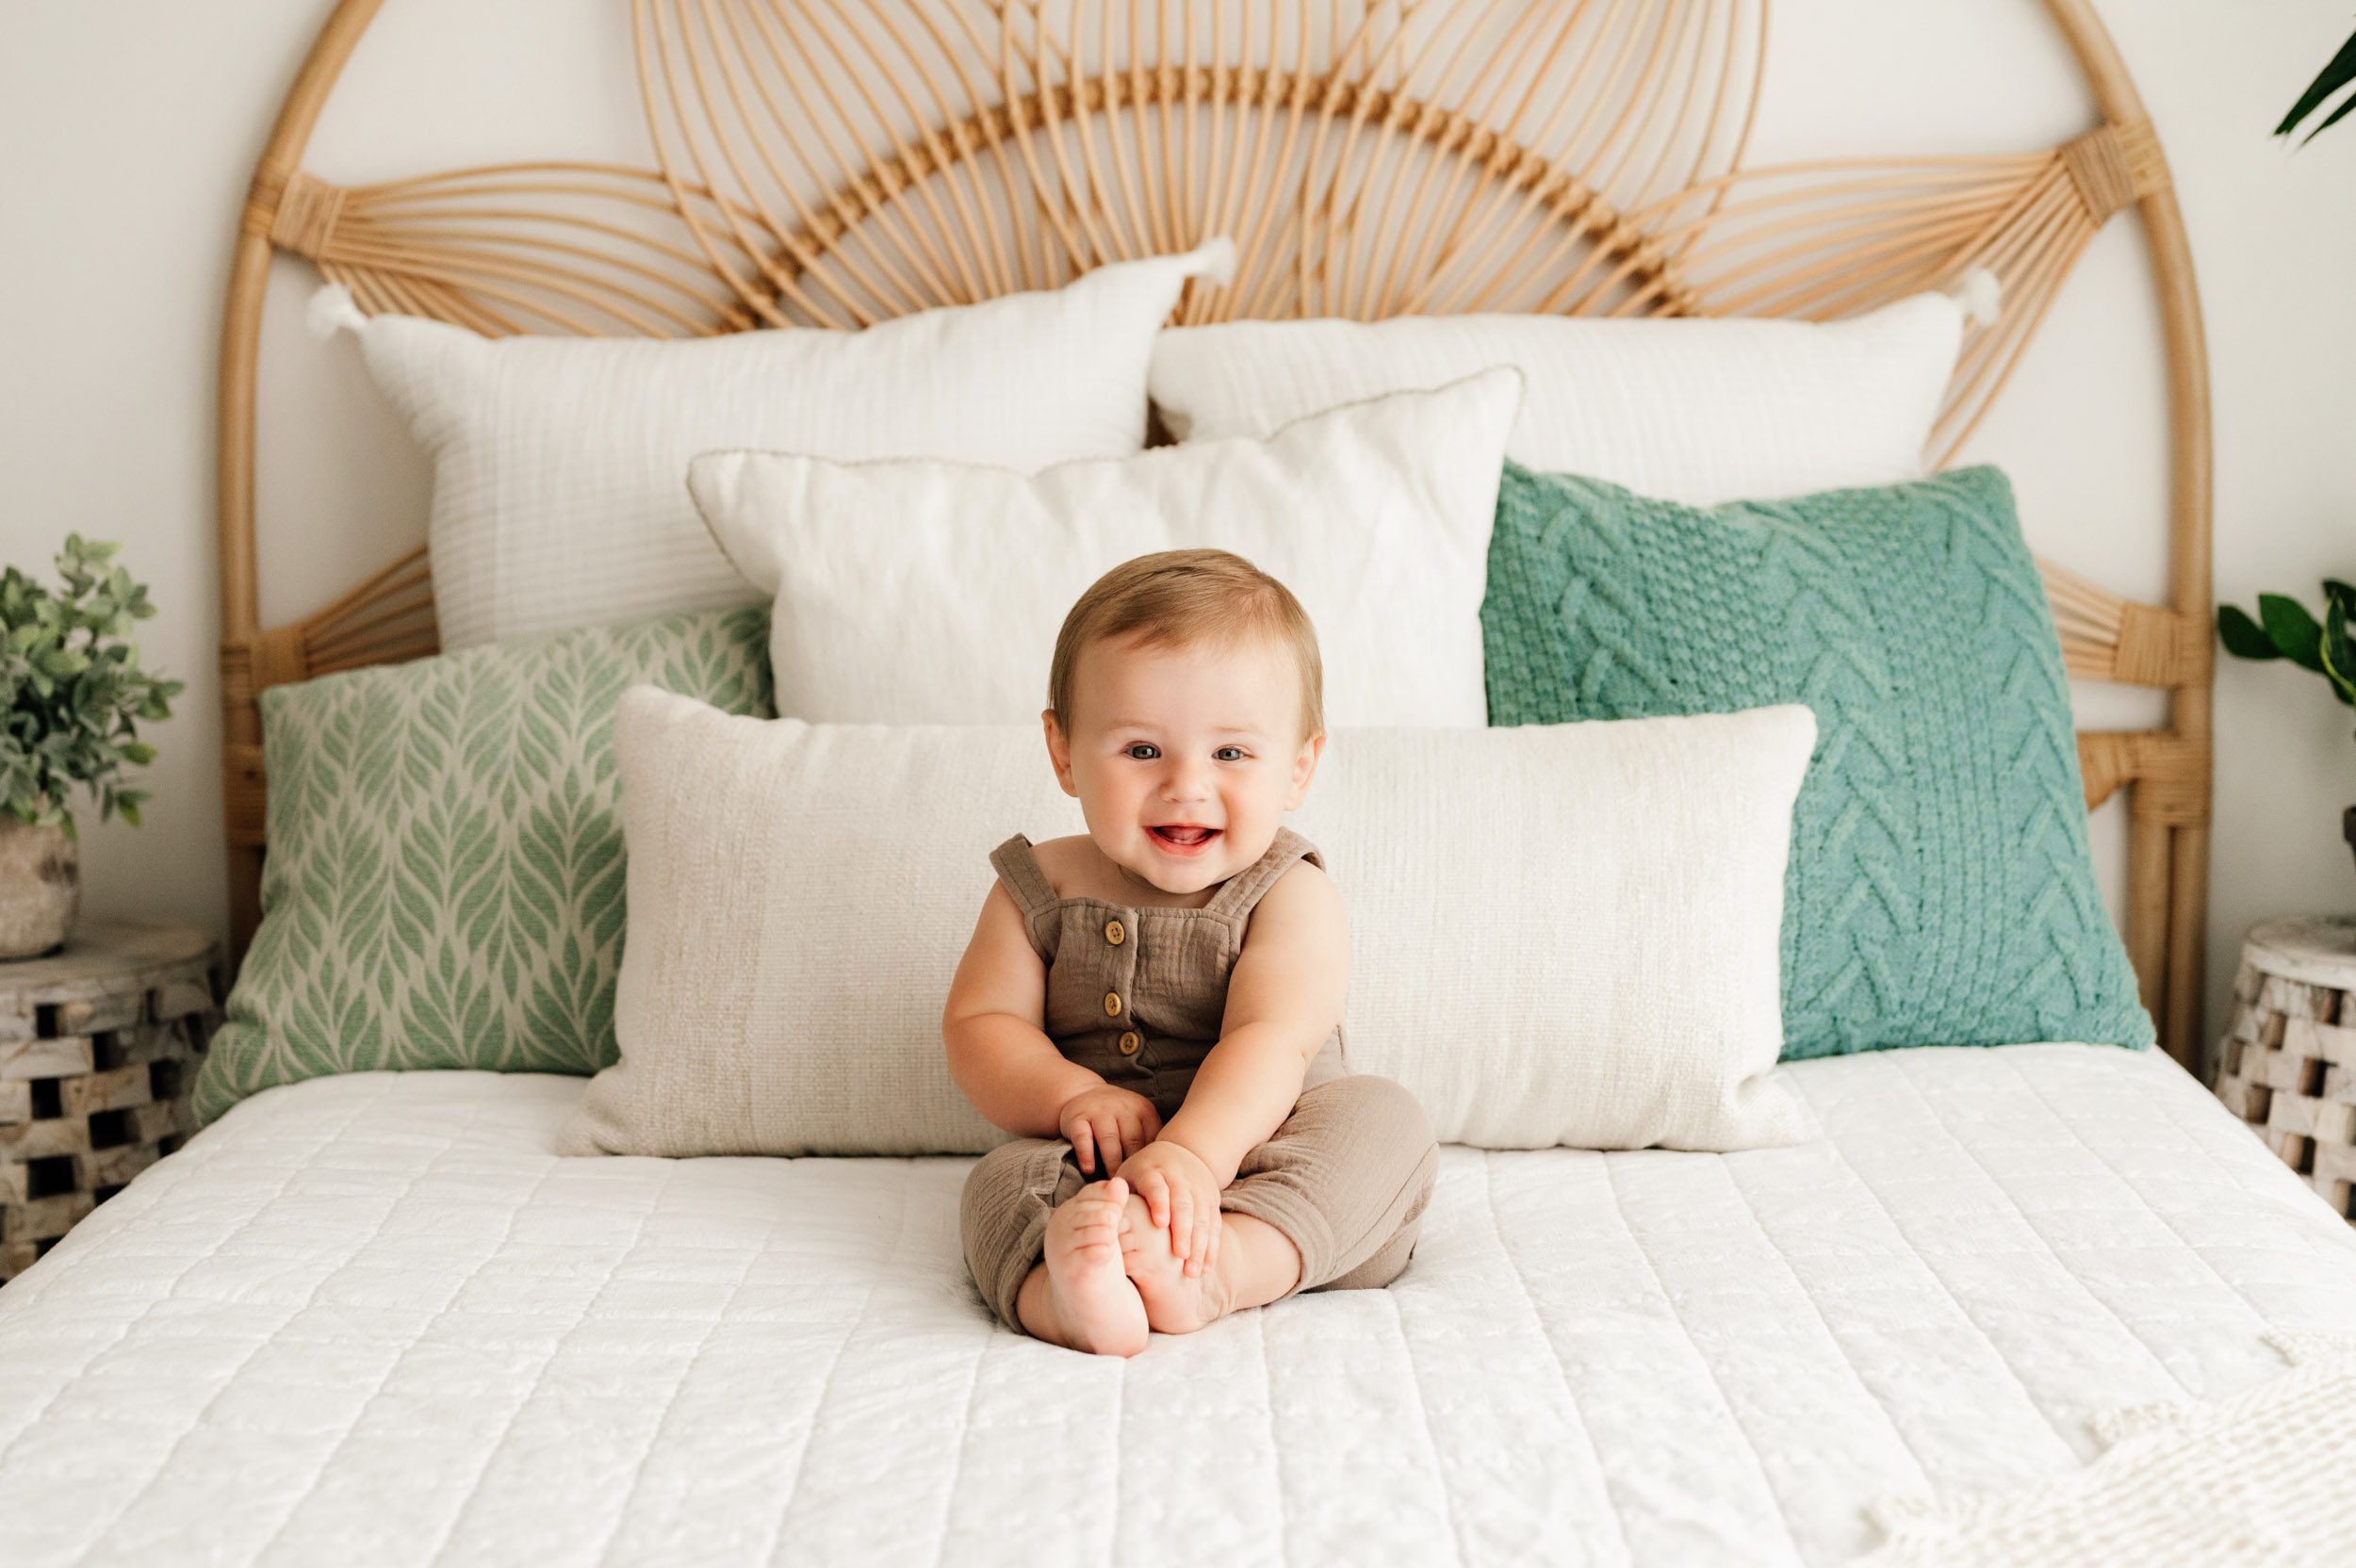 a baby boy sitting on a bed and grabbing his toes as he smiles at the camera during an 8 month milestone photoshoot